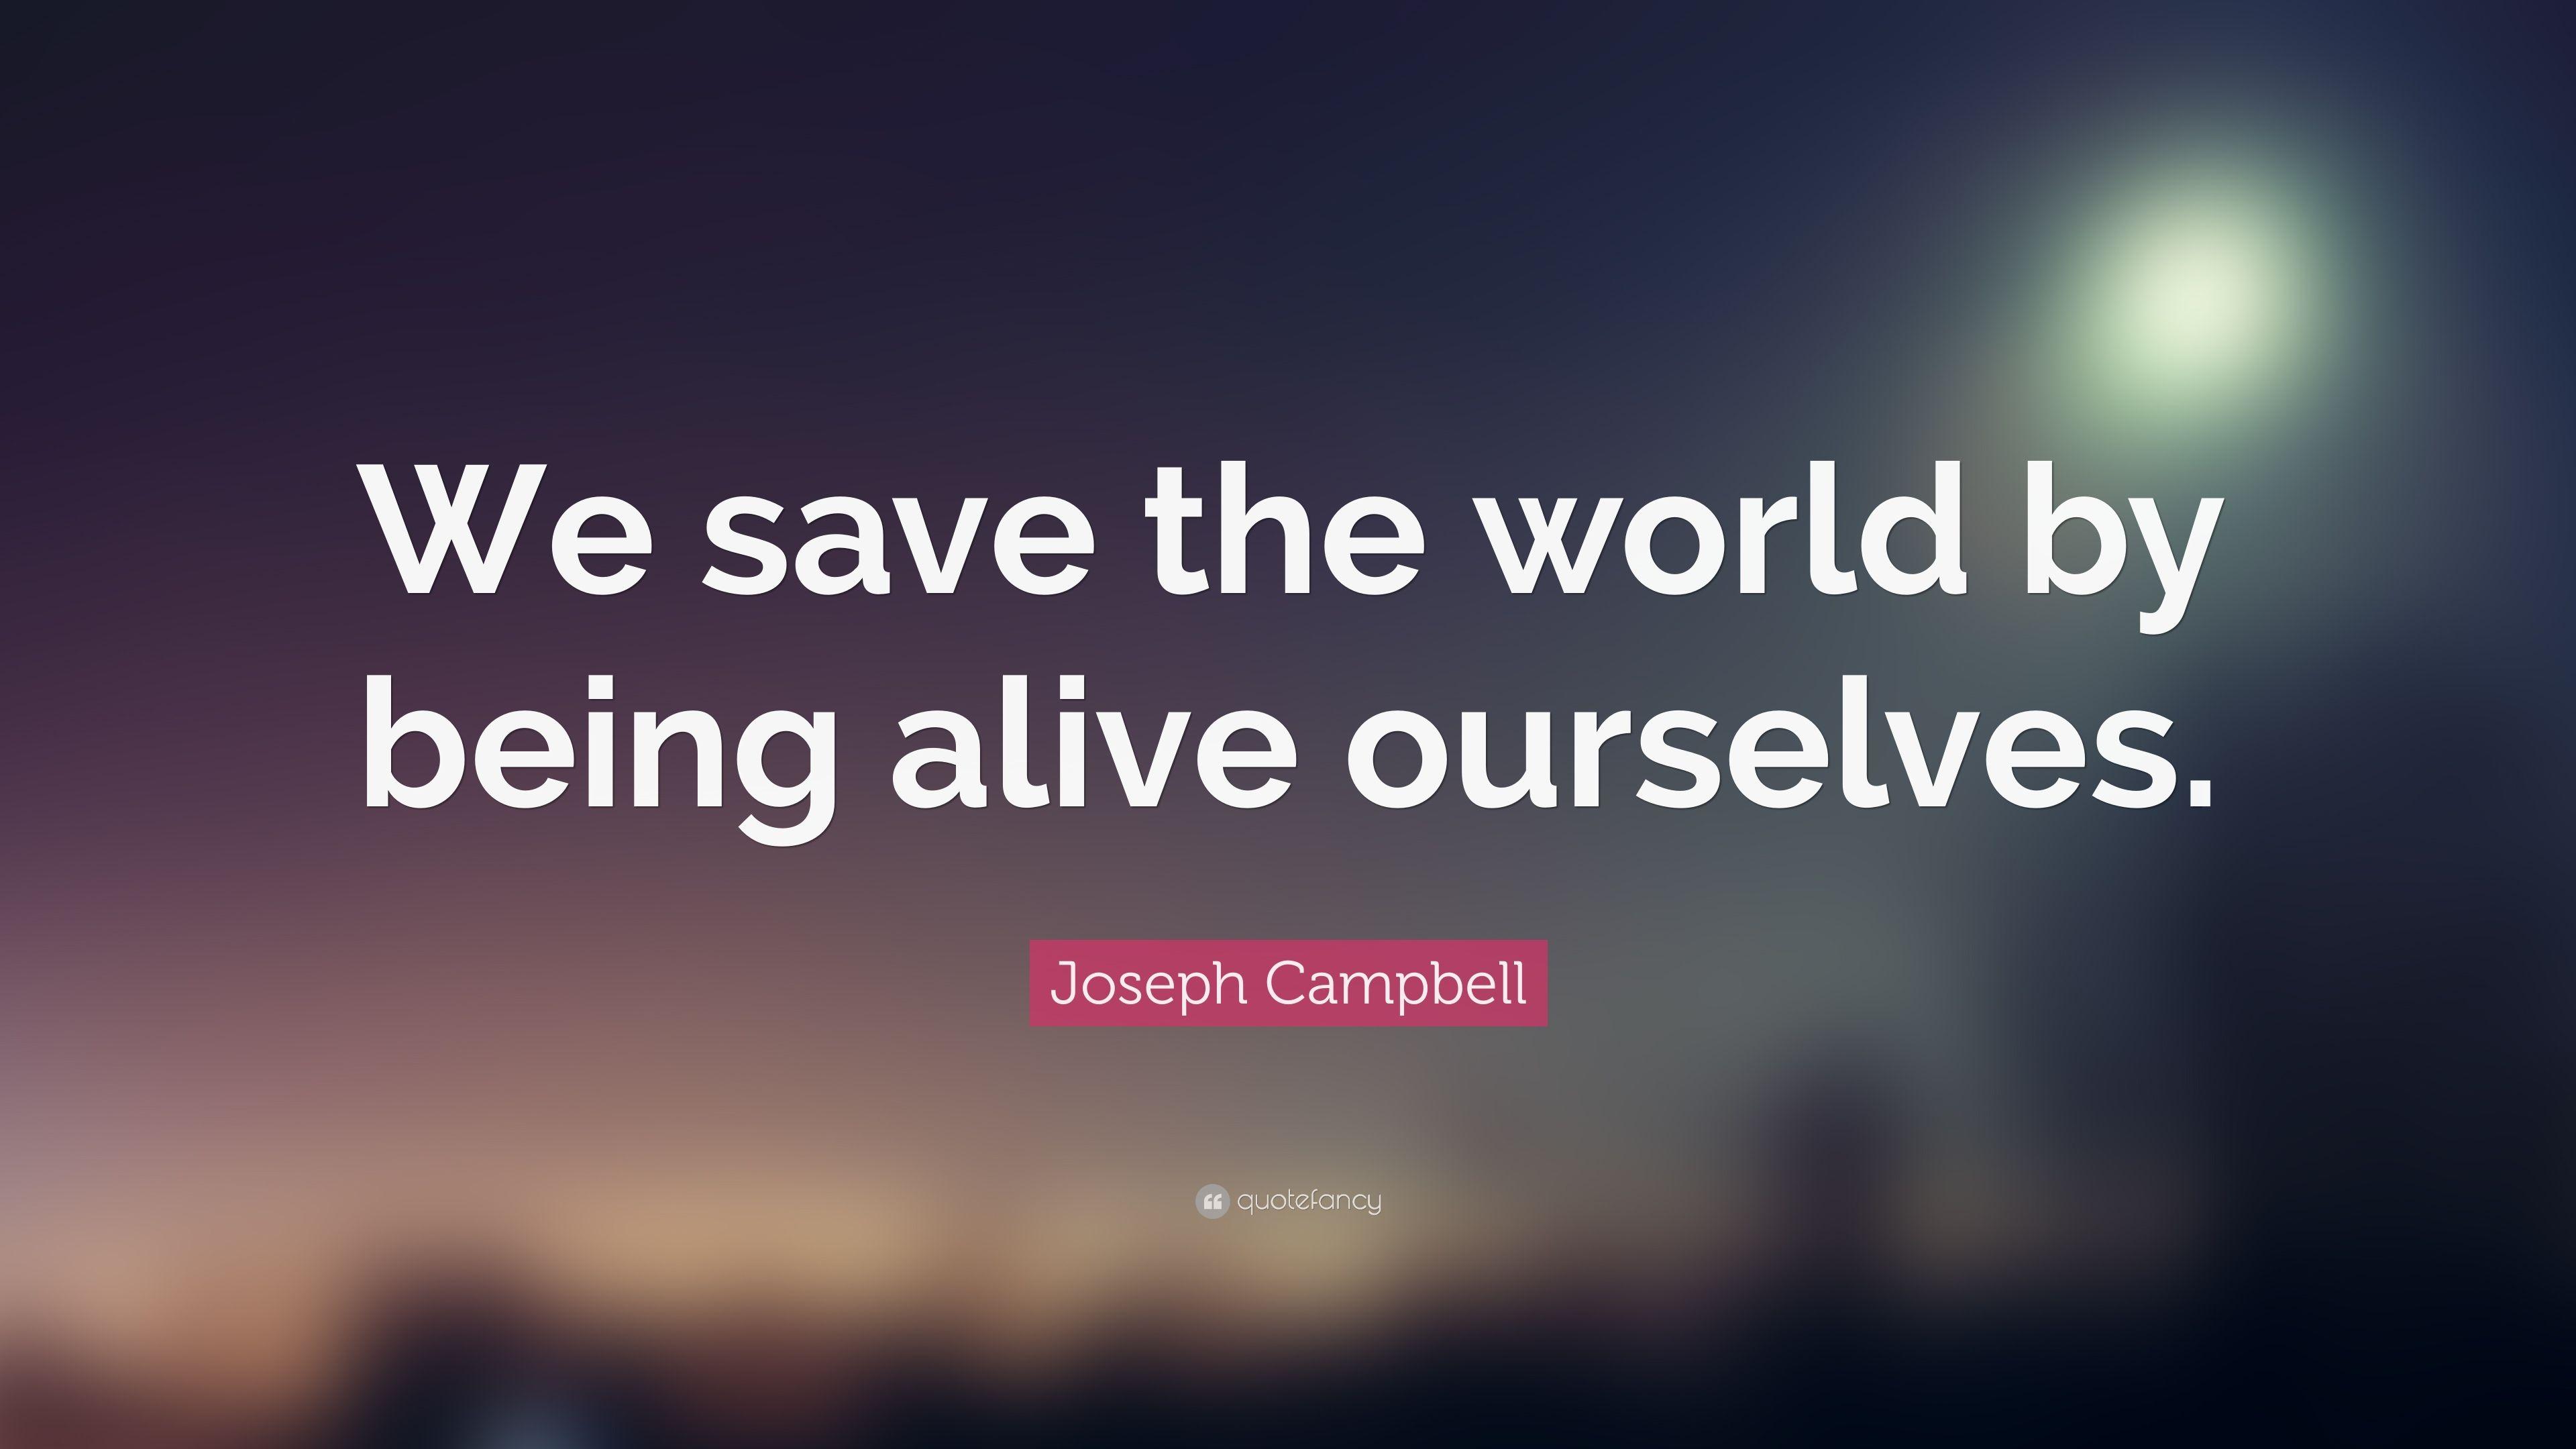 Joseph Campbell Quote: “We save the world by being alive ourselves